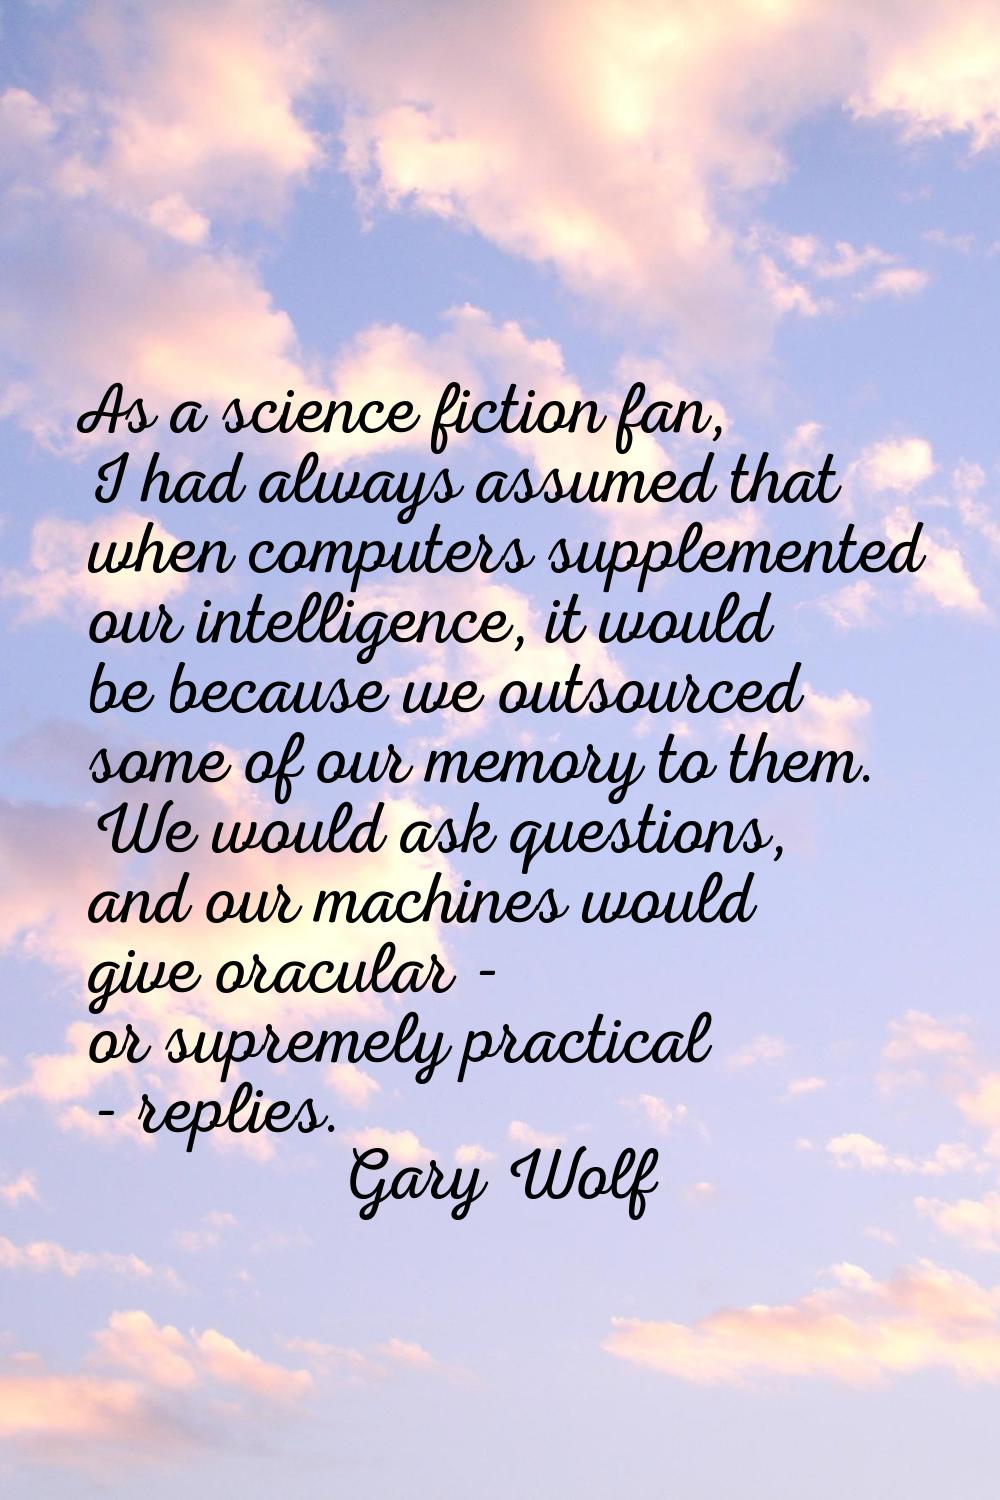 As a science fiction fan, I had always assumed that when computers supplemented our intelligence, i